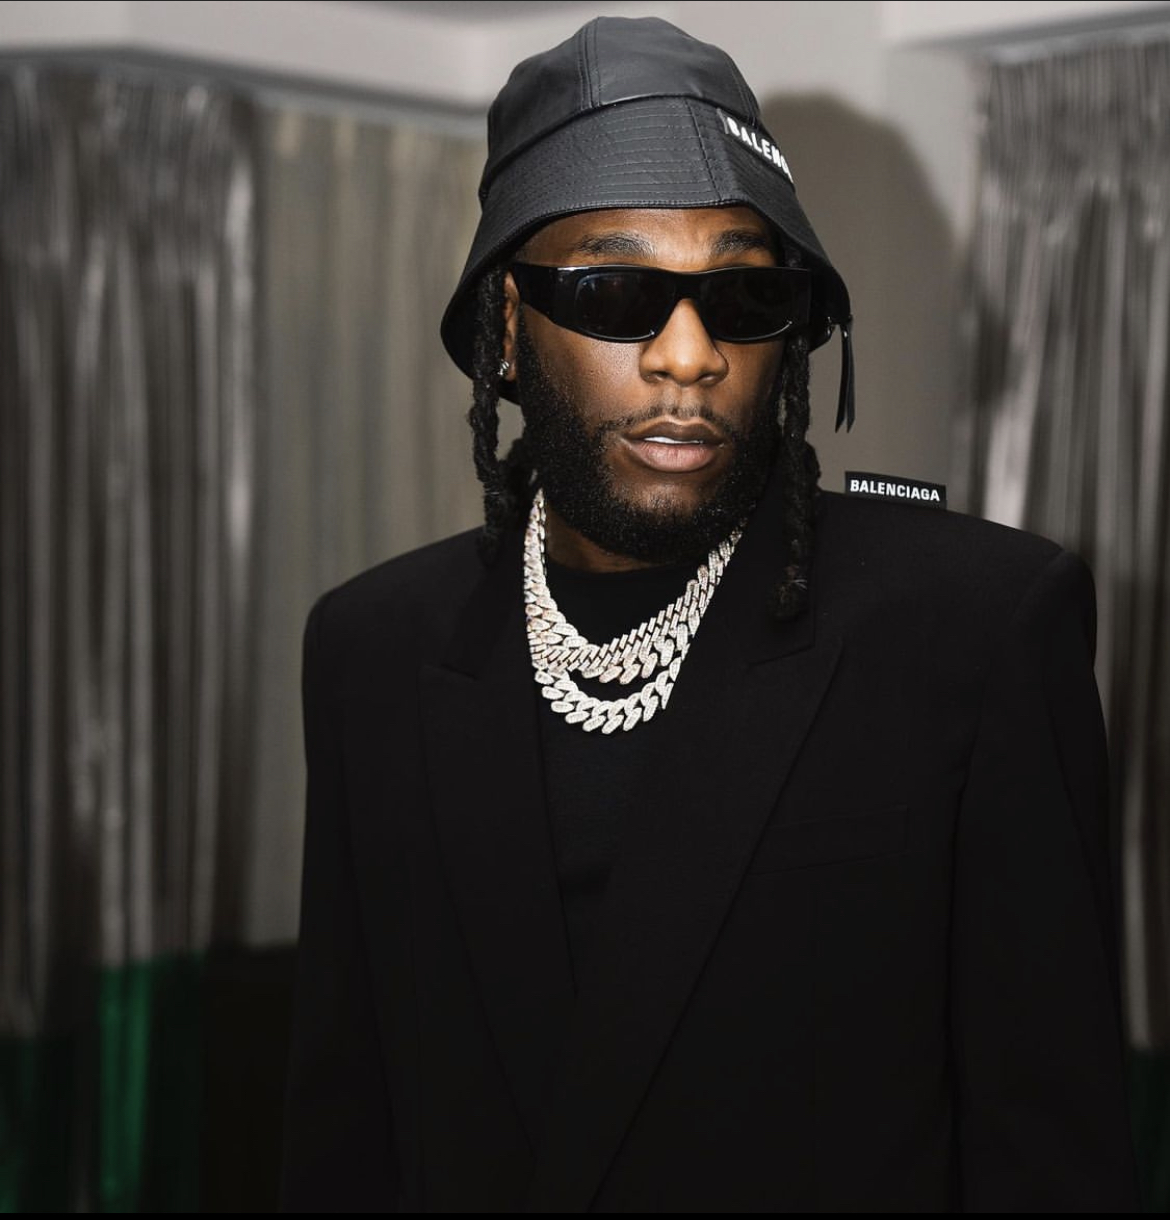 EXCLUSIVE: Burna Boy’s Security Shot Directly At Us, Injured Two Persons After Lady Rejected Advances - Eyewitness